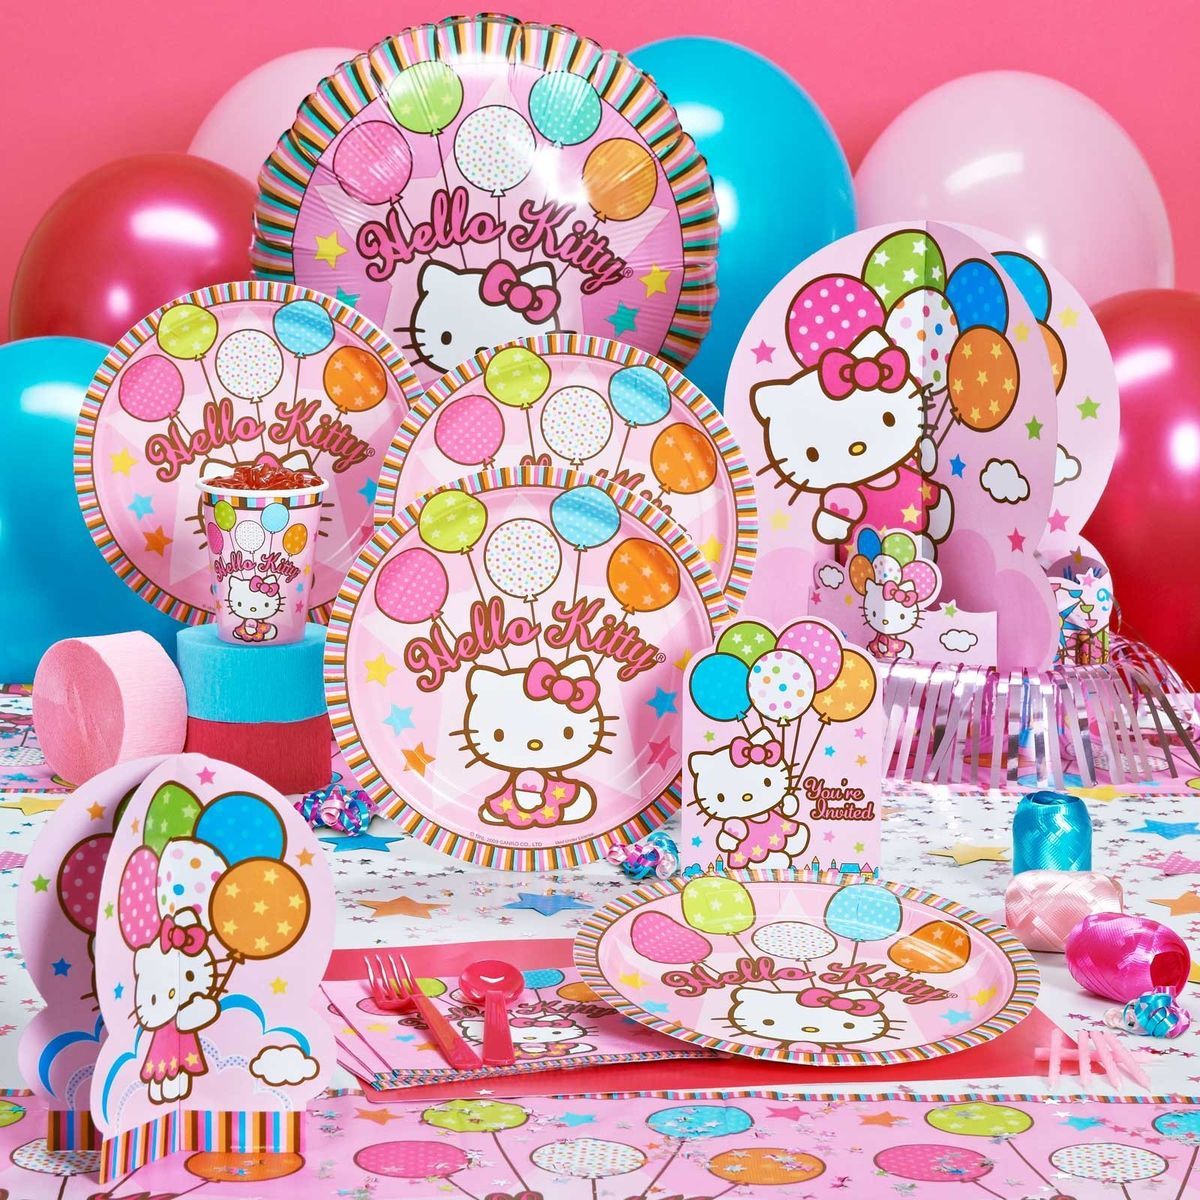 Hello Kitty Party Supplies Decorations Plates Napkins Cups Accessories